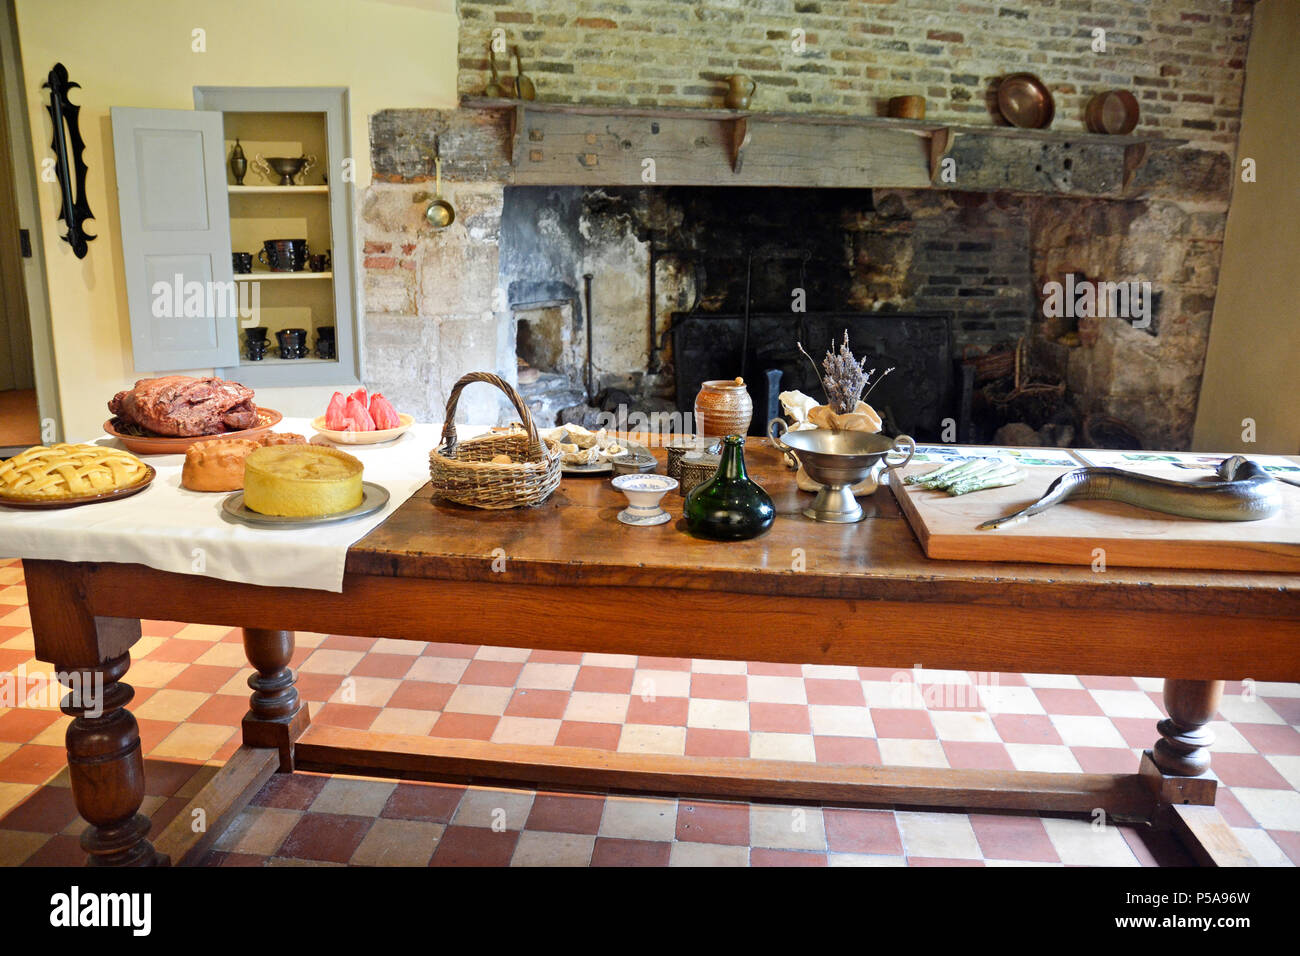 Oliver Cromwell's House in Ely, Cambridgeshire, England, UK. The kitchen dates from about 1215. Stock Photo